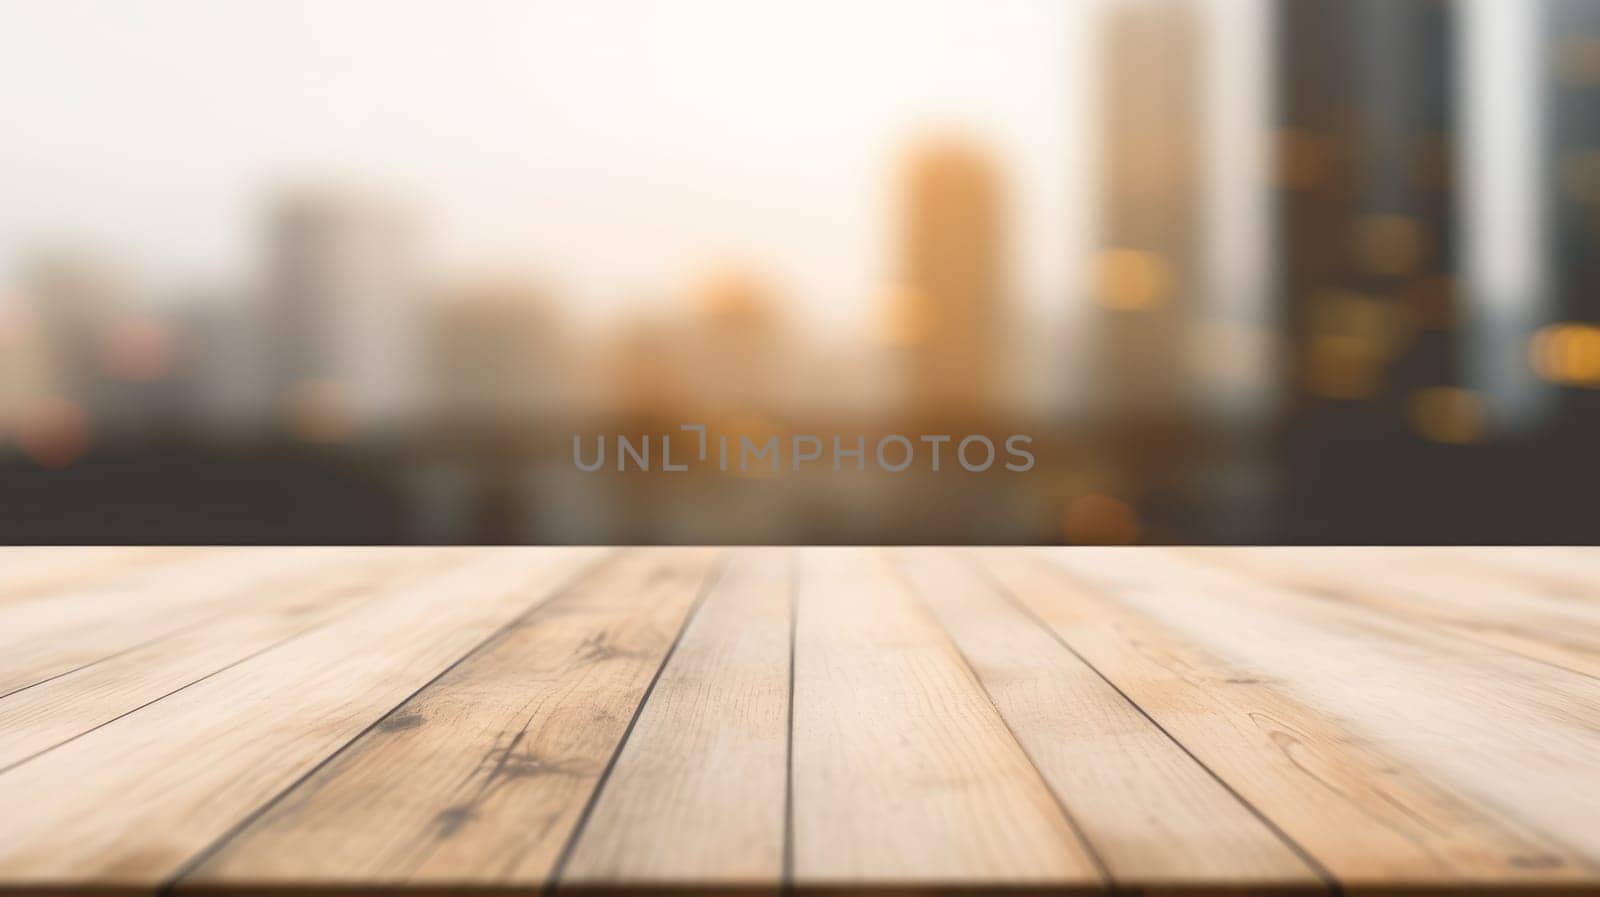 The empty wooden table top with blur background of an office and city. Exuberant image.